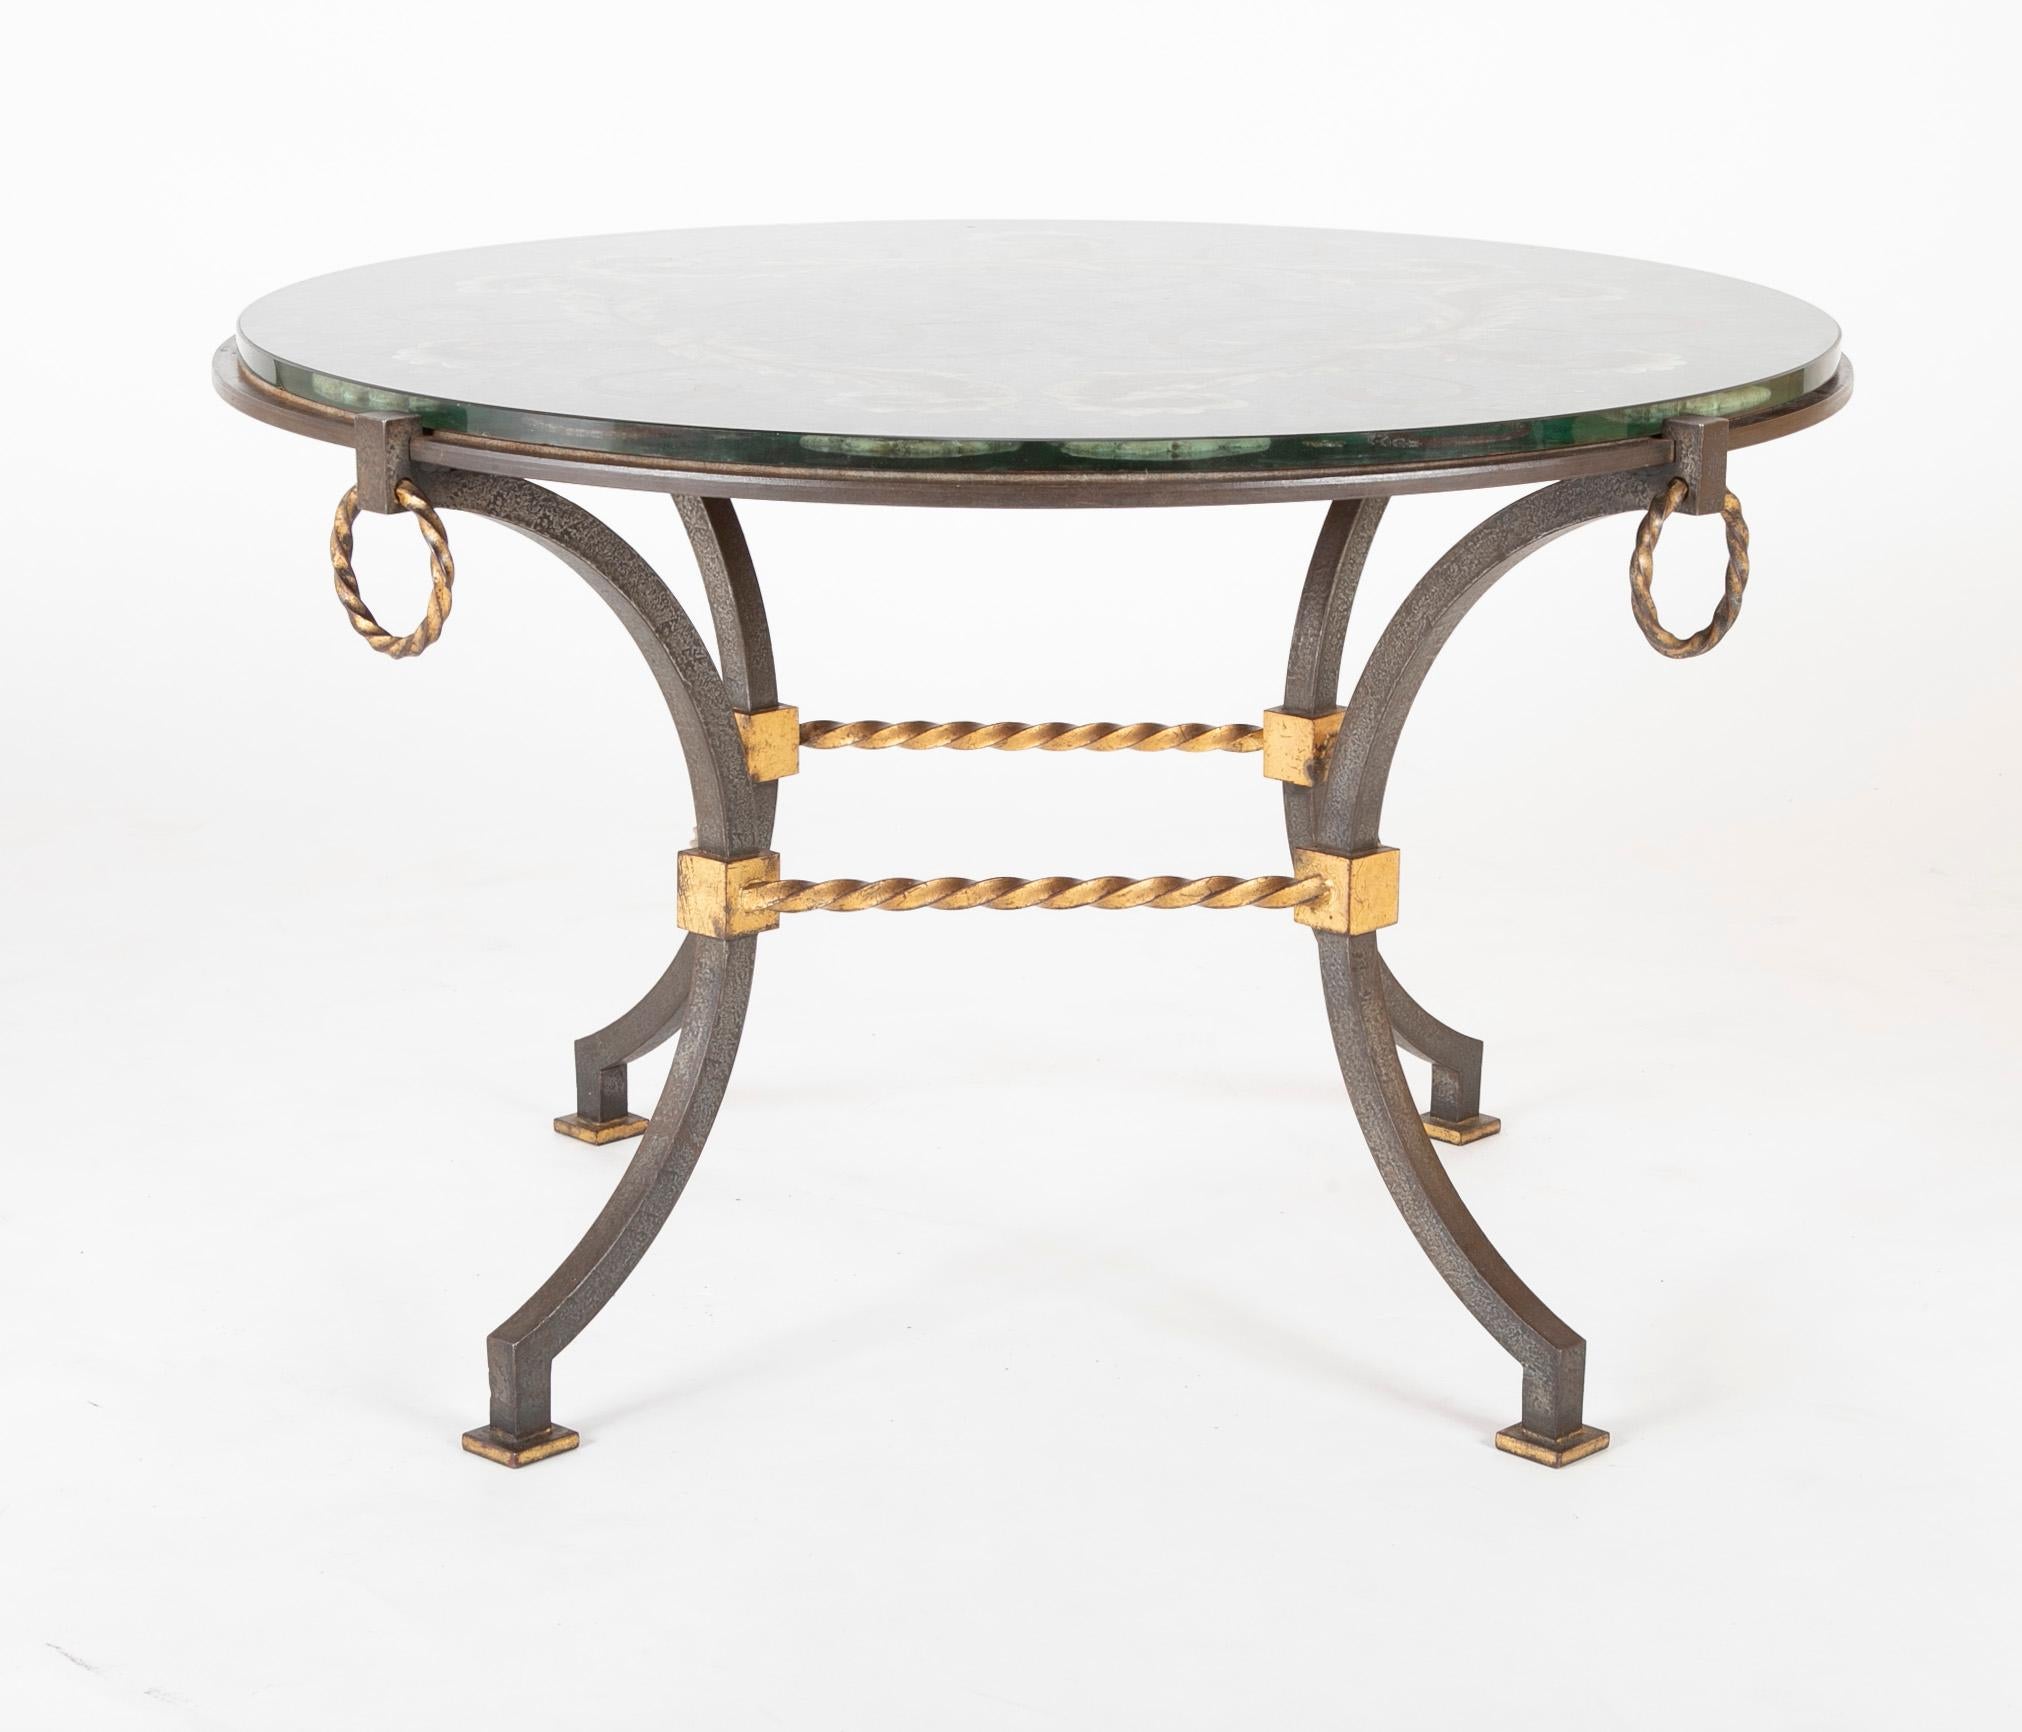 A round wrought iron and églomisé coffee table, possibly French, circa 1930s.